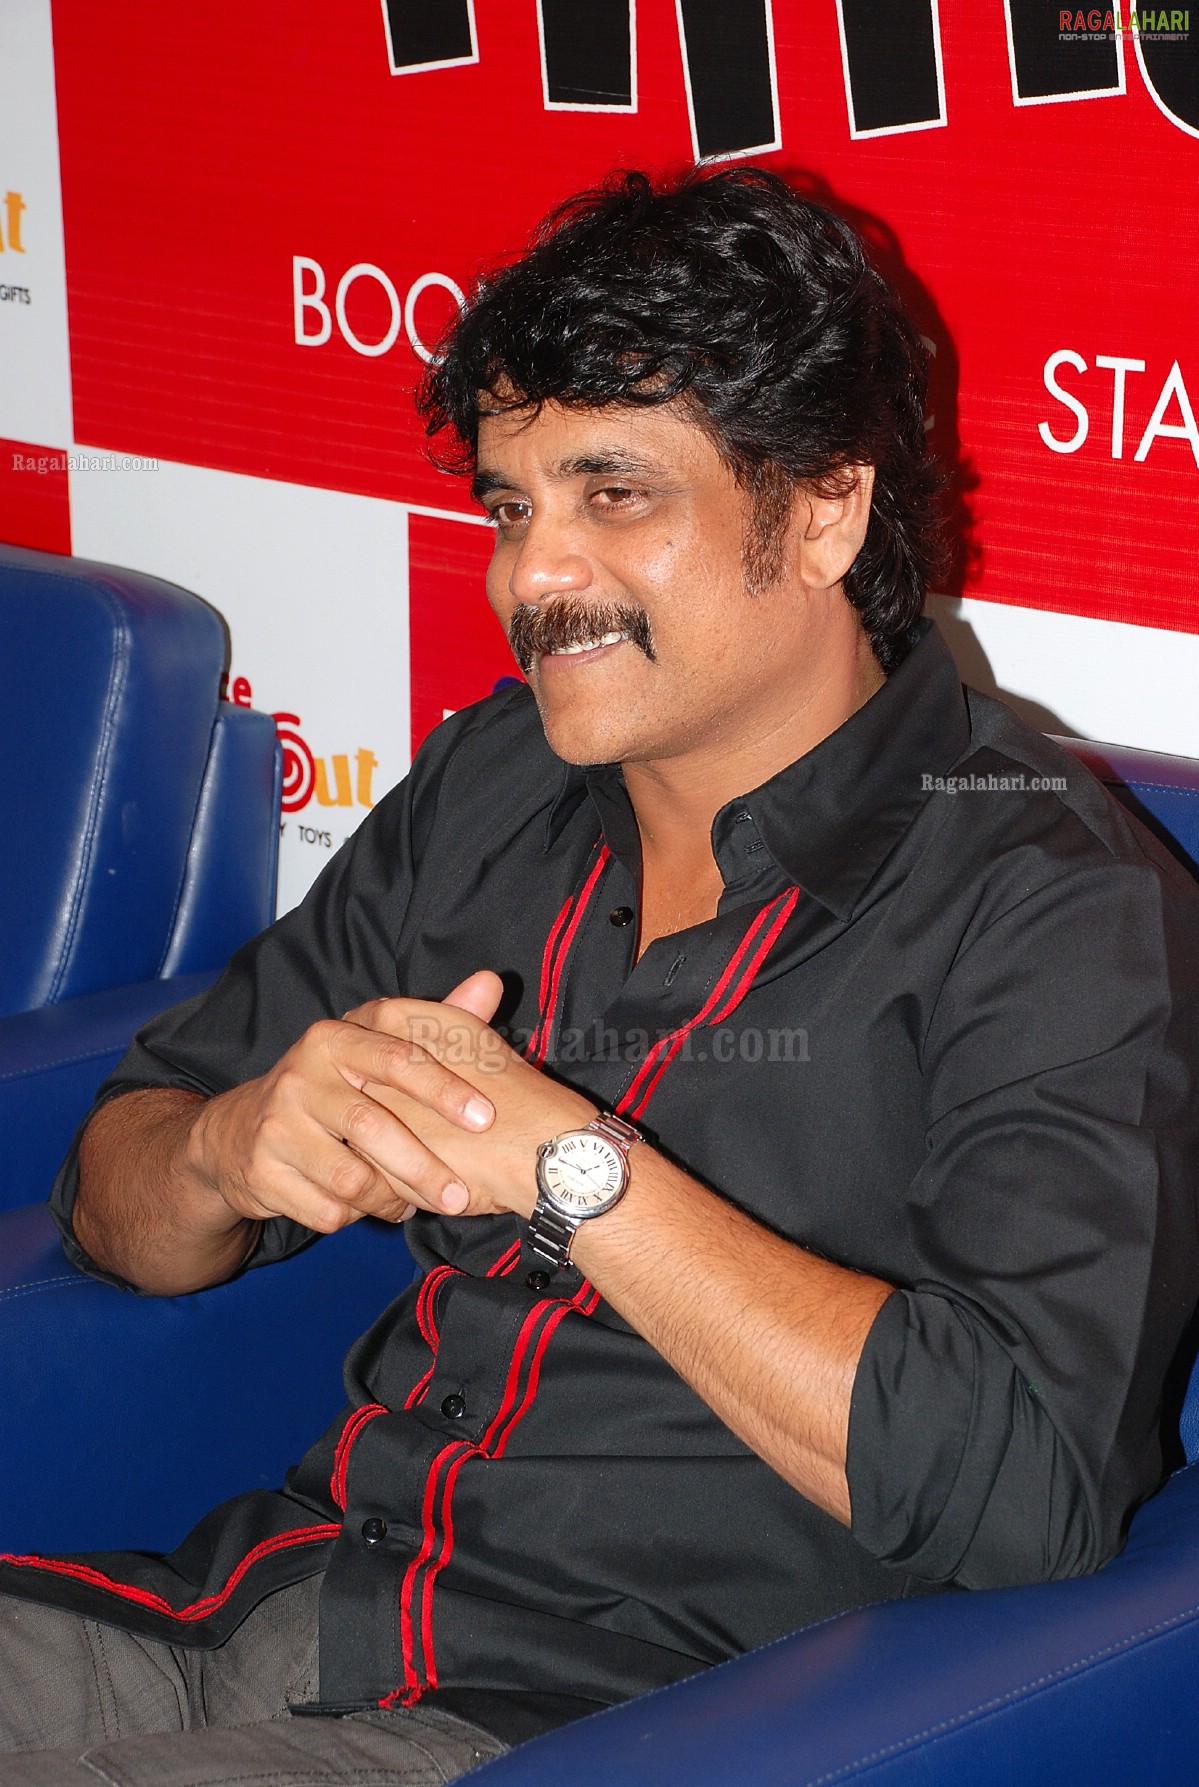 Nagarjuna-Amala Launches the Book 'Blossom Showers' by Giselle Mehta